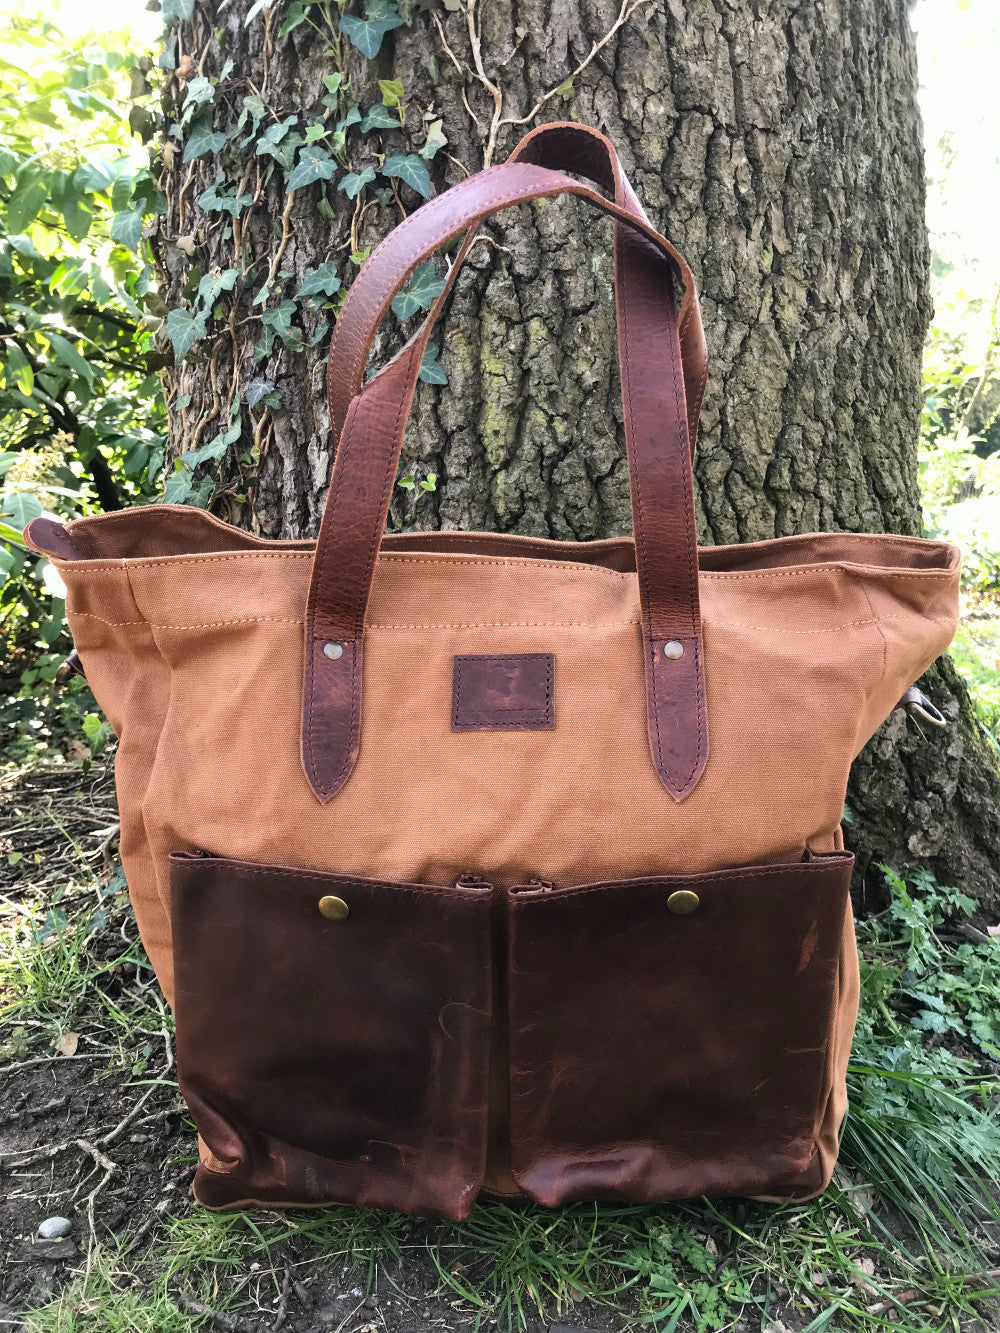 The Blenheim.  A large zipped tote bag by Burghley Bags.  Handmade from eco-friendly vegetable tanned leather and strong cotton canvas, with a canvas shoulder strap. Shown in classic tan.